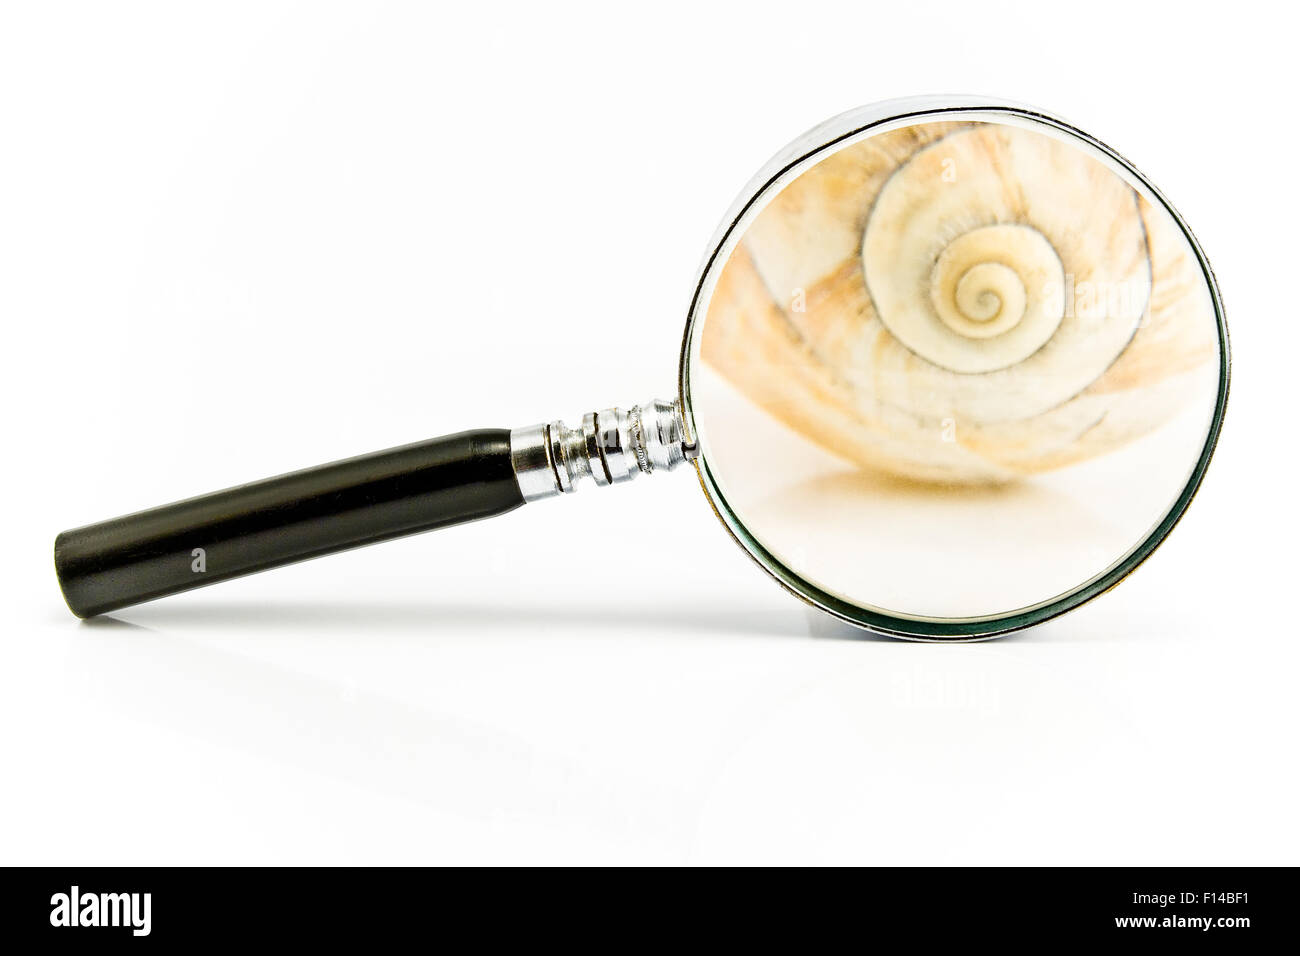 Magnifier in front of a Spiral Shell isolated on white Stock Photo